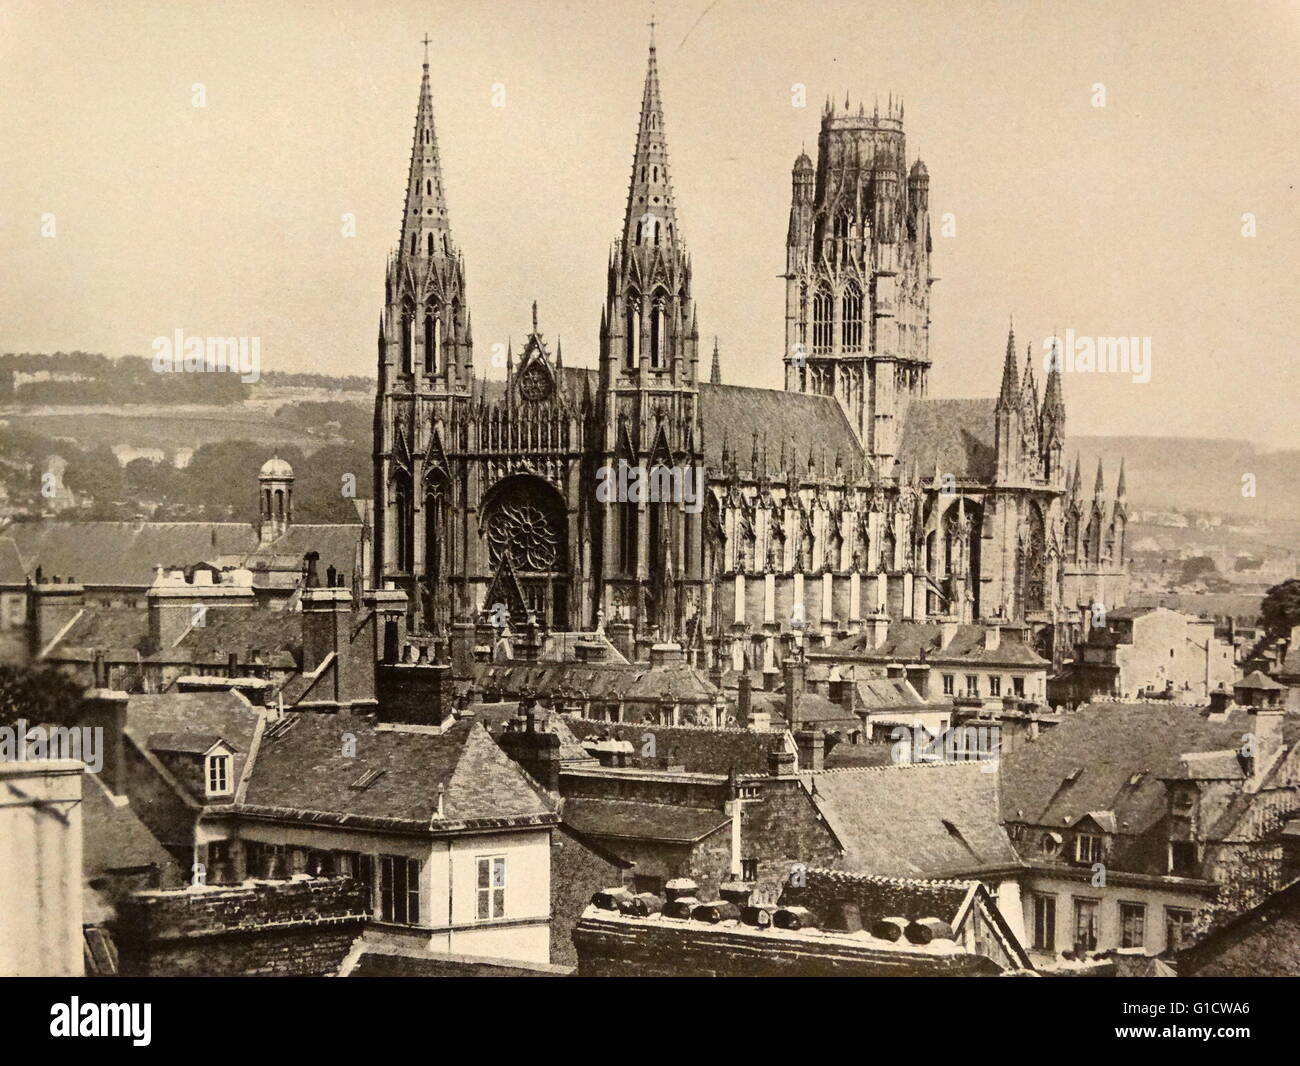 Photographic print of the Church of St. Ouen , a large Gothic Roman Catholic church in Rouen, France. Dated 19th Century Stock Photo